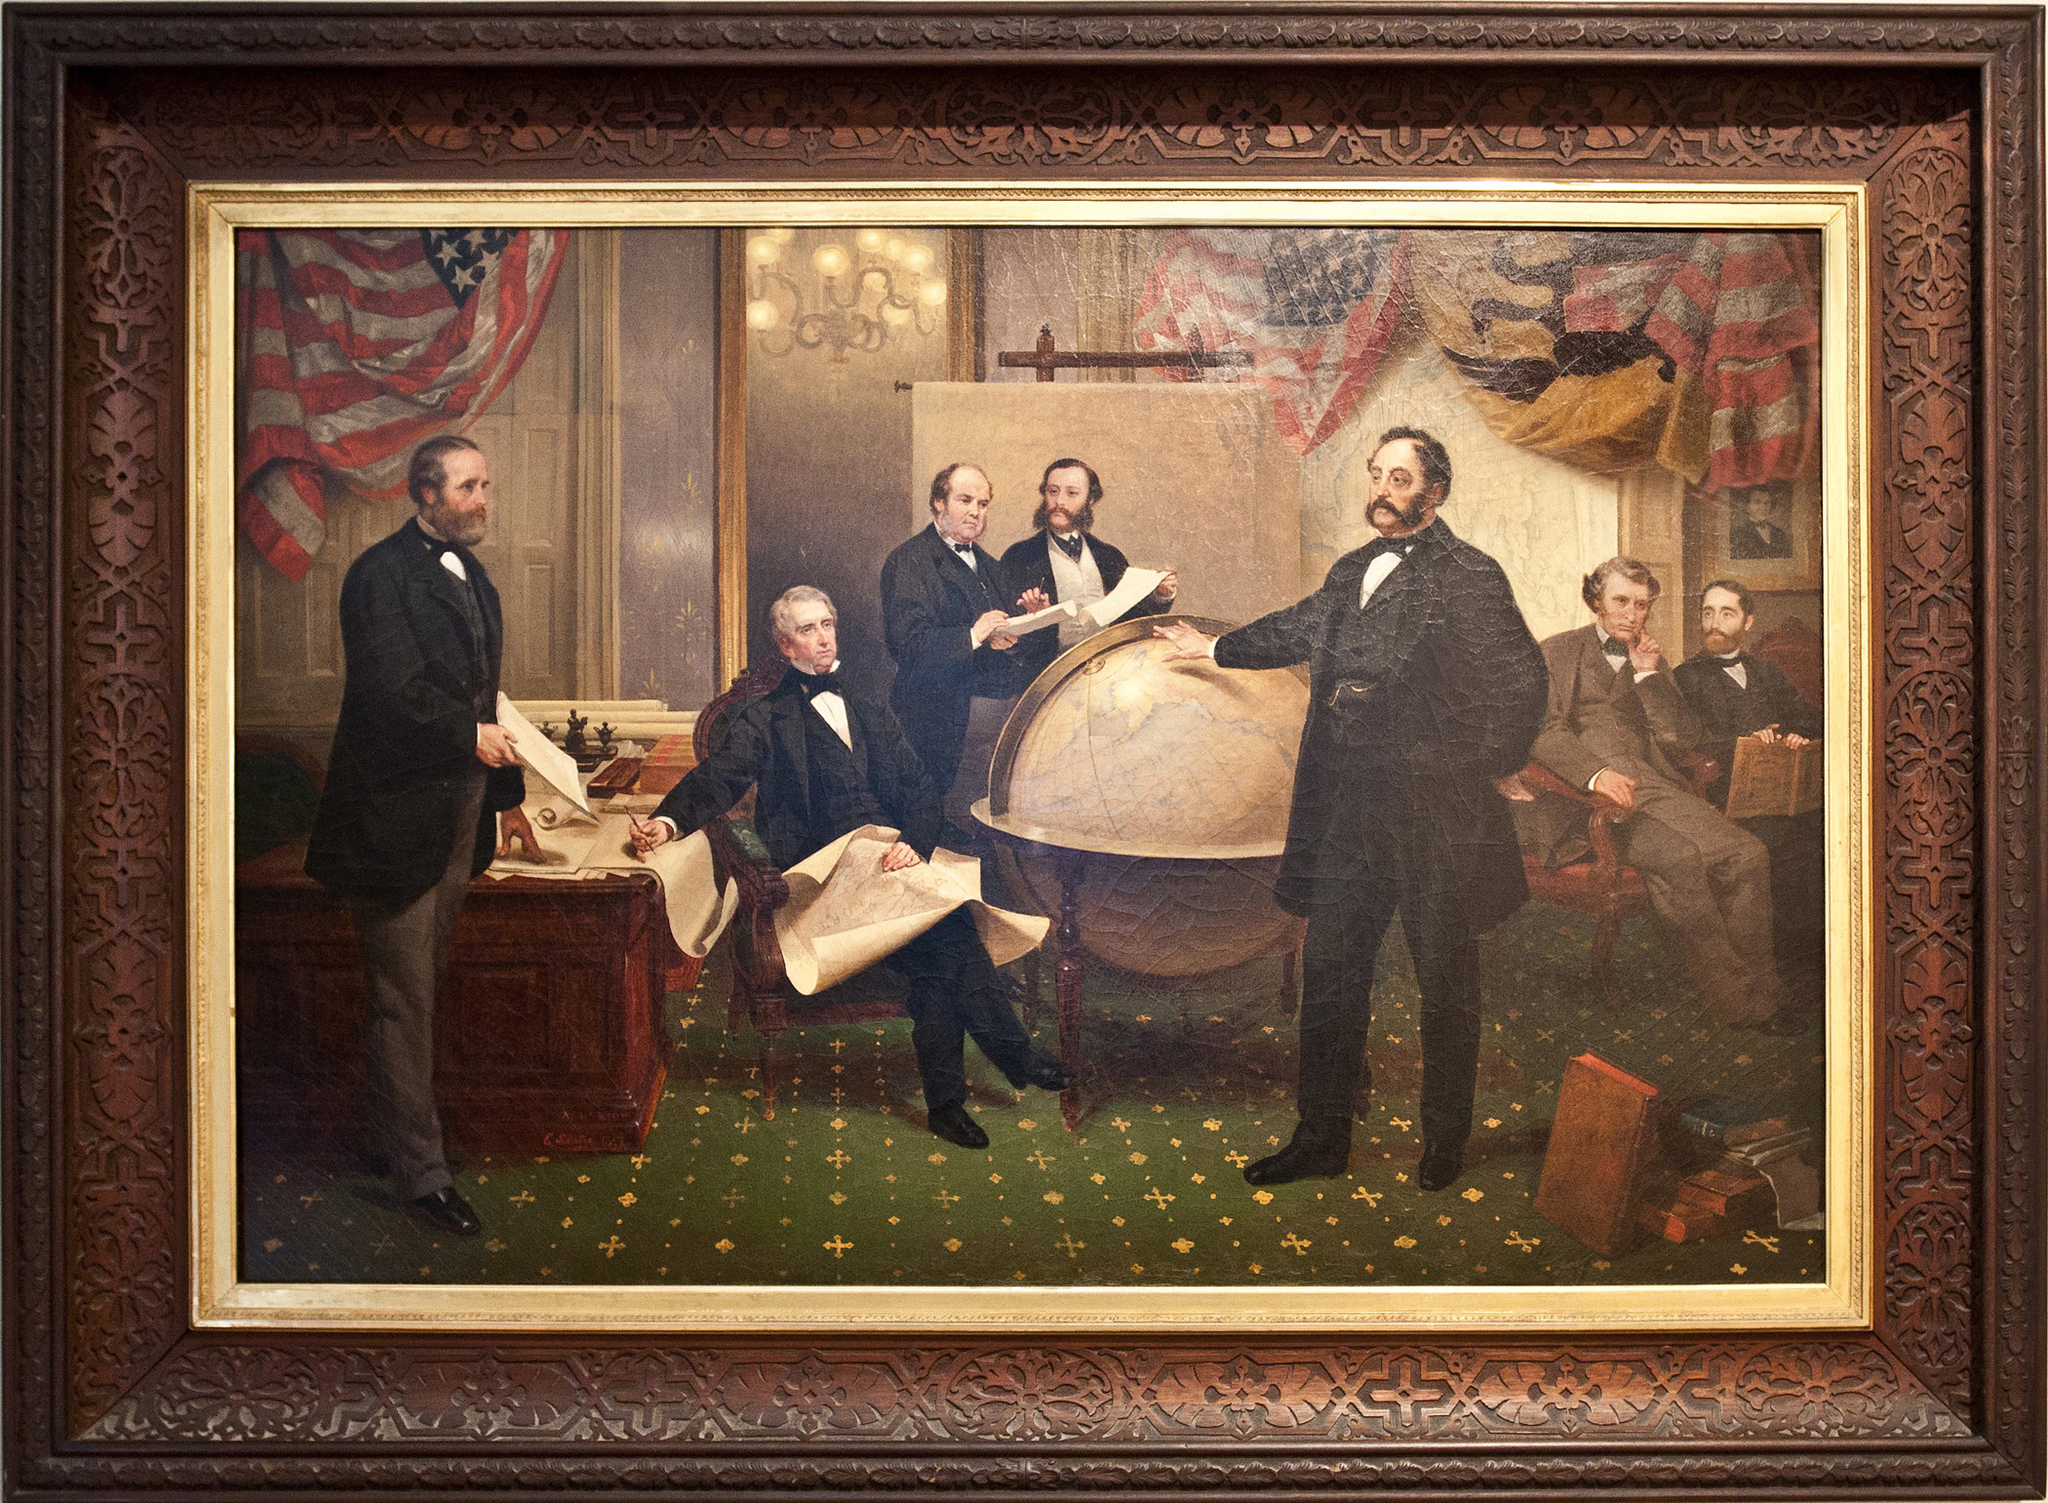 “Signing of the Alaska Treaty” by Emanuel Leutze will be on display in Alaska during its sesquicentennial year. (Courtesy image)